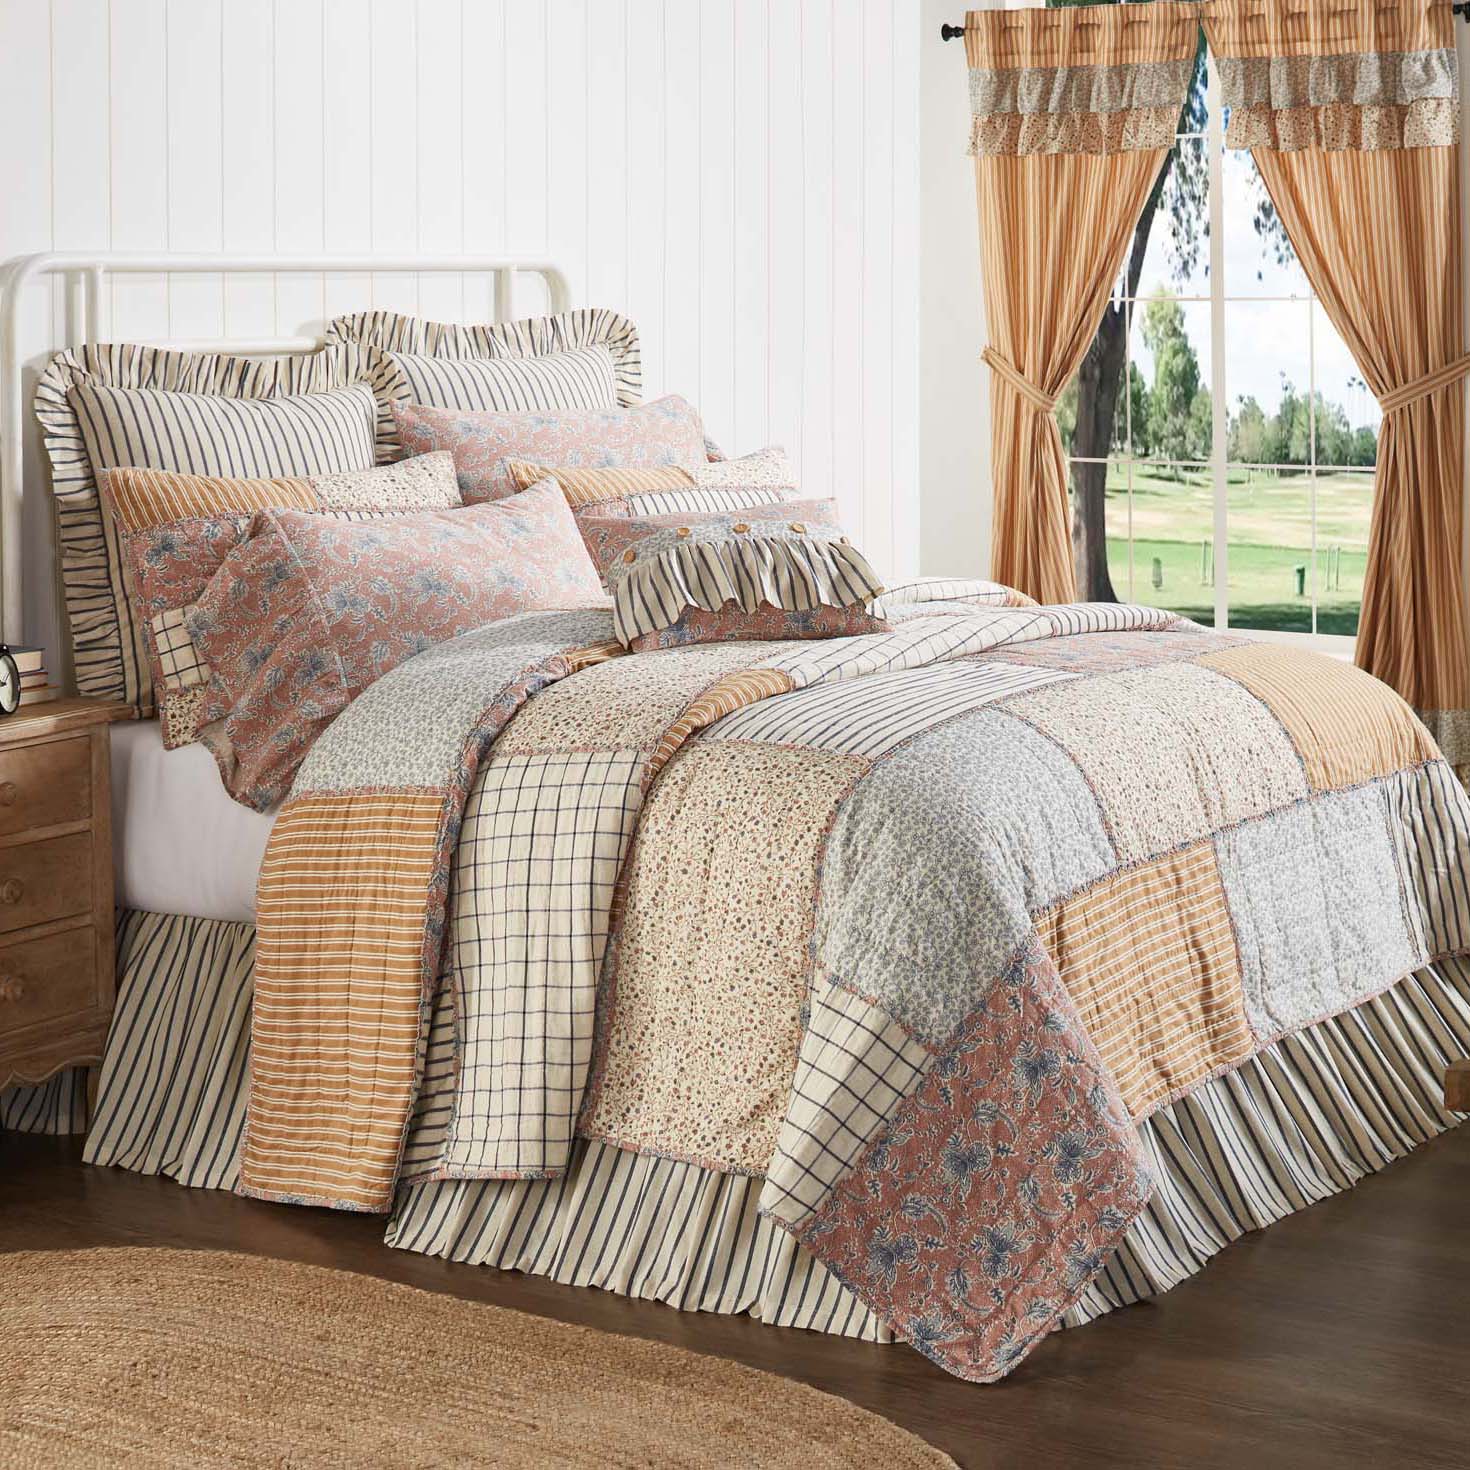 Kaila Luxury King Quilt 120Wx105L